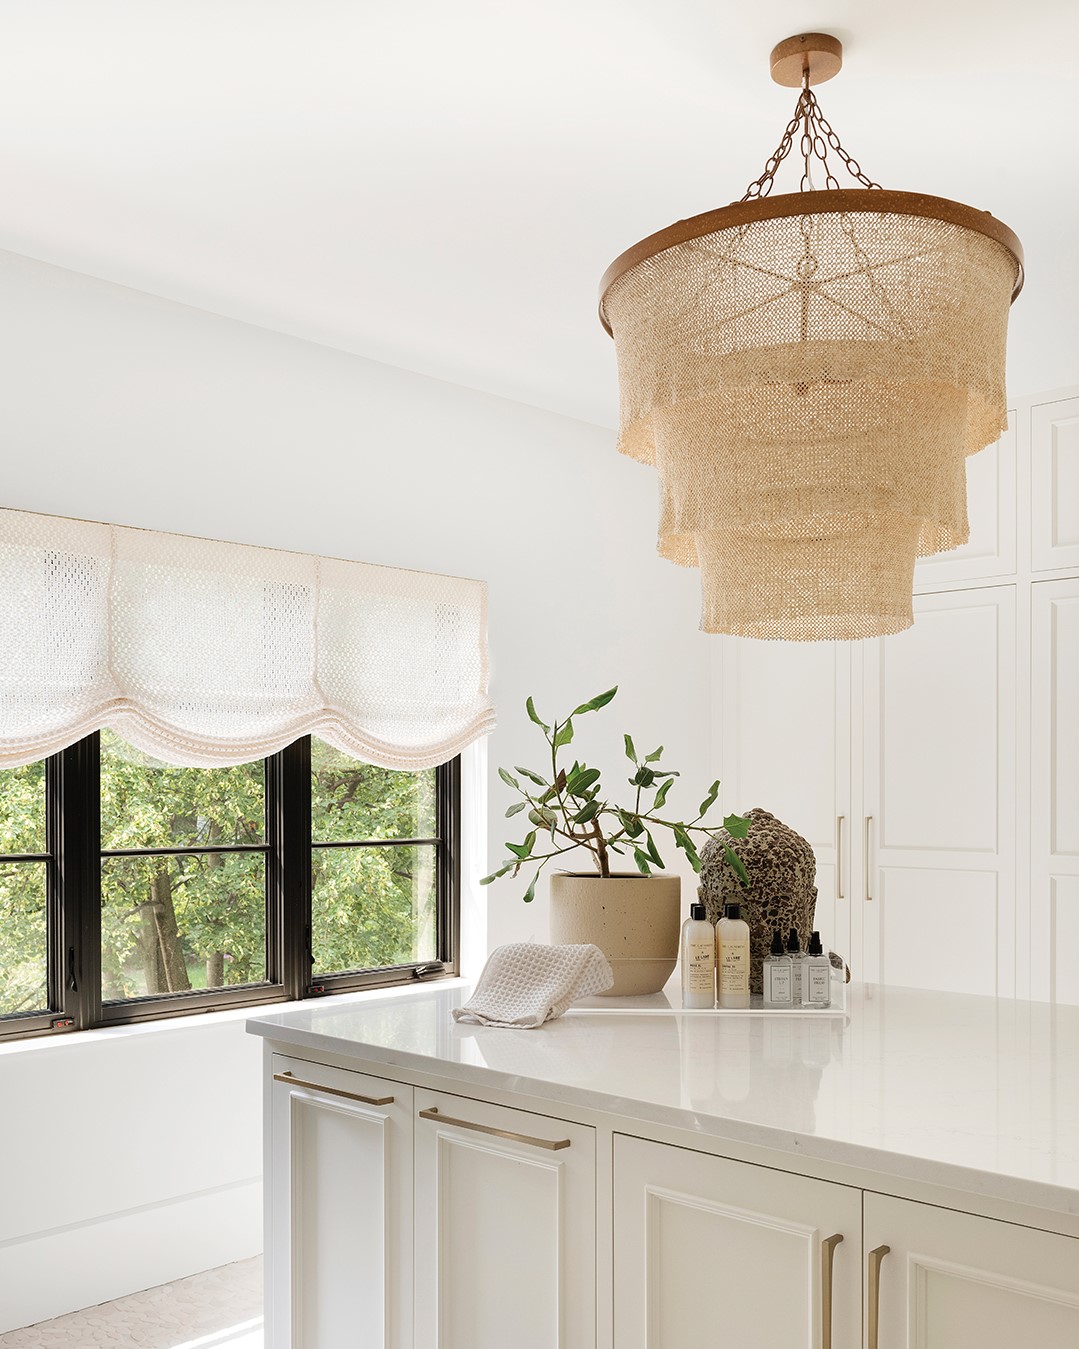 A woven chandelier is an example of texture in statement lighting.